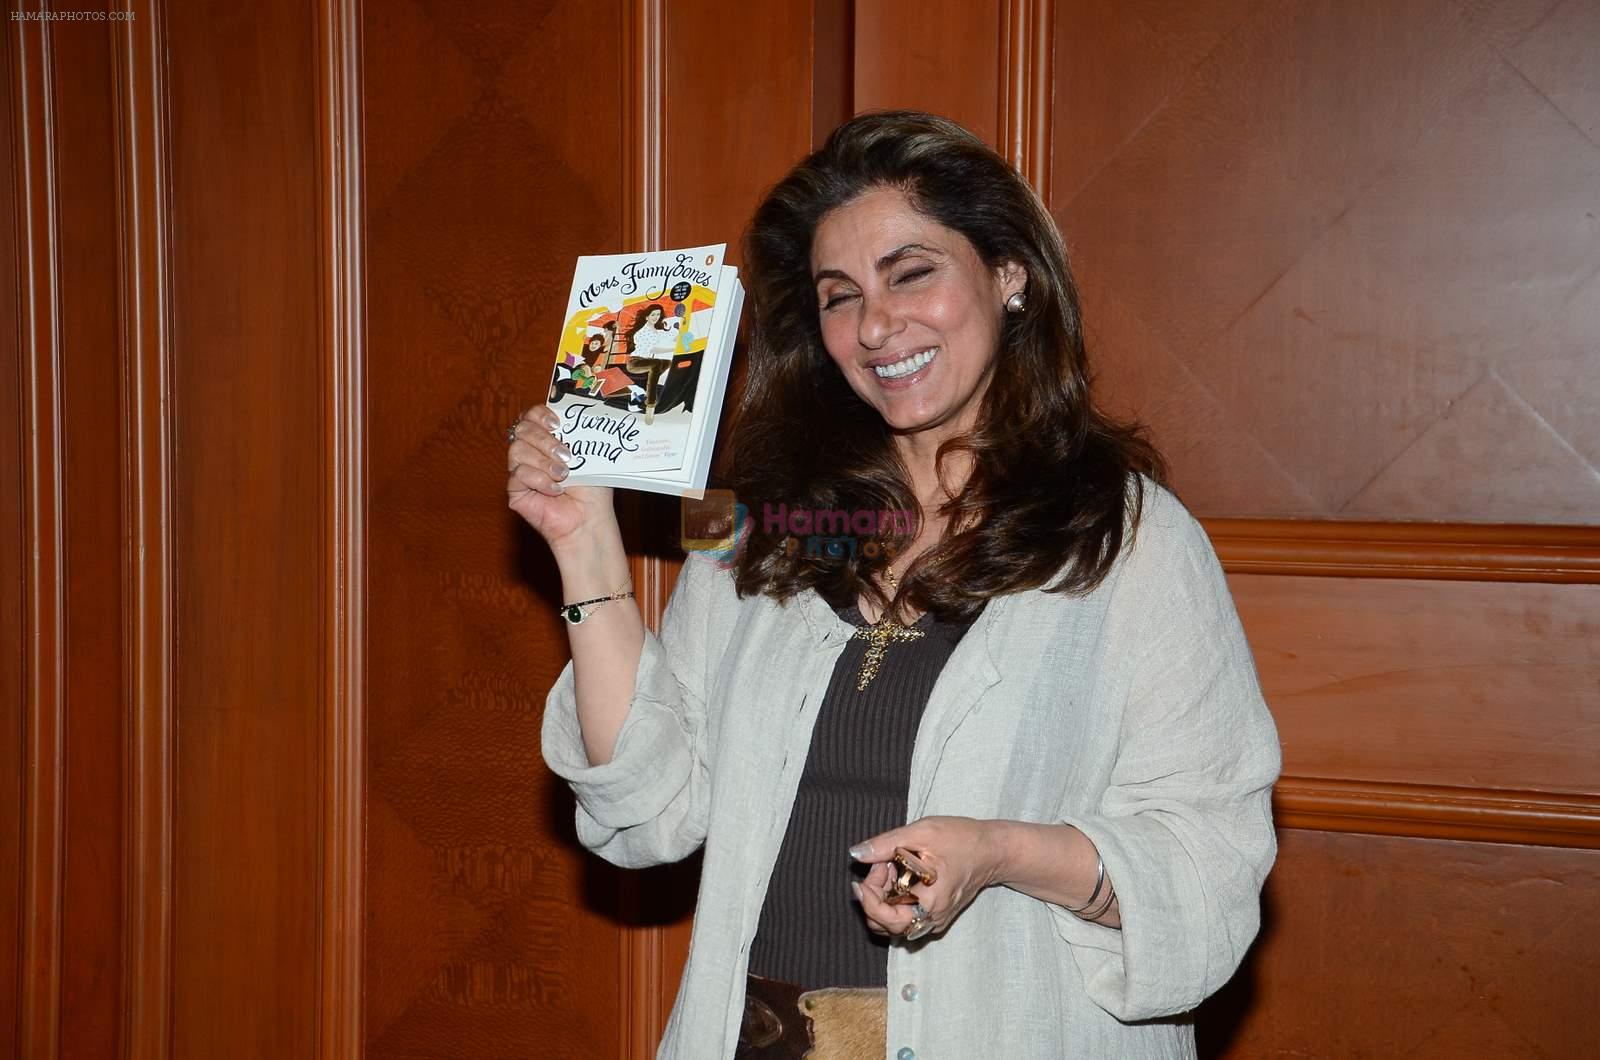 Dimple Kapadia at Twinkle's book launch in J W marriott on 18th Aug 2015